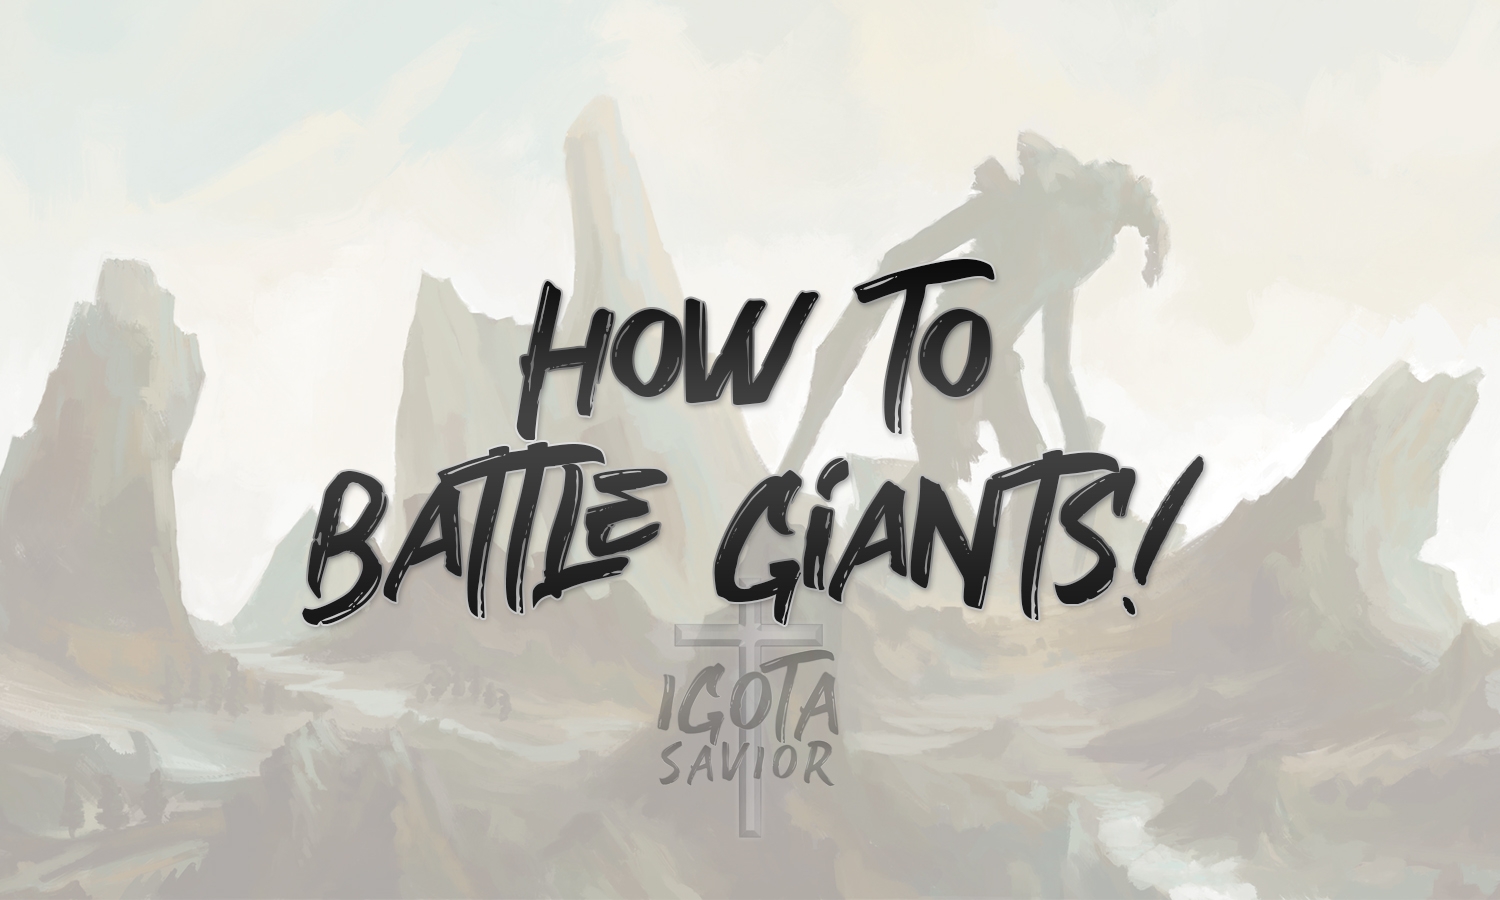 How to Battle Giants!